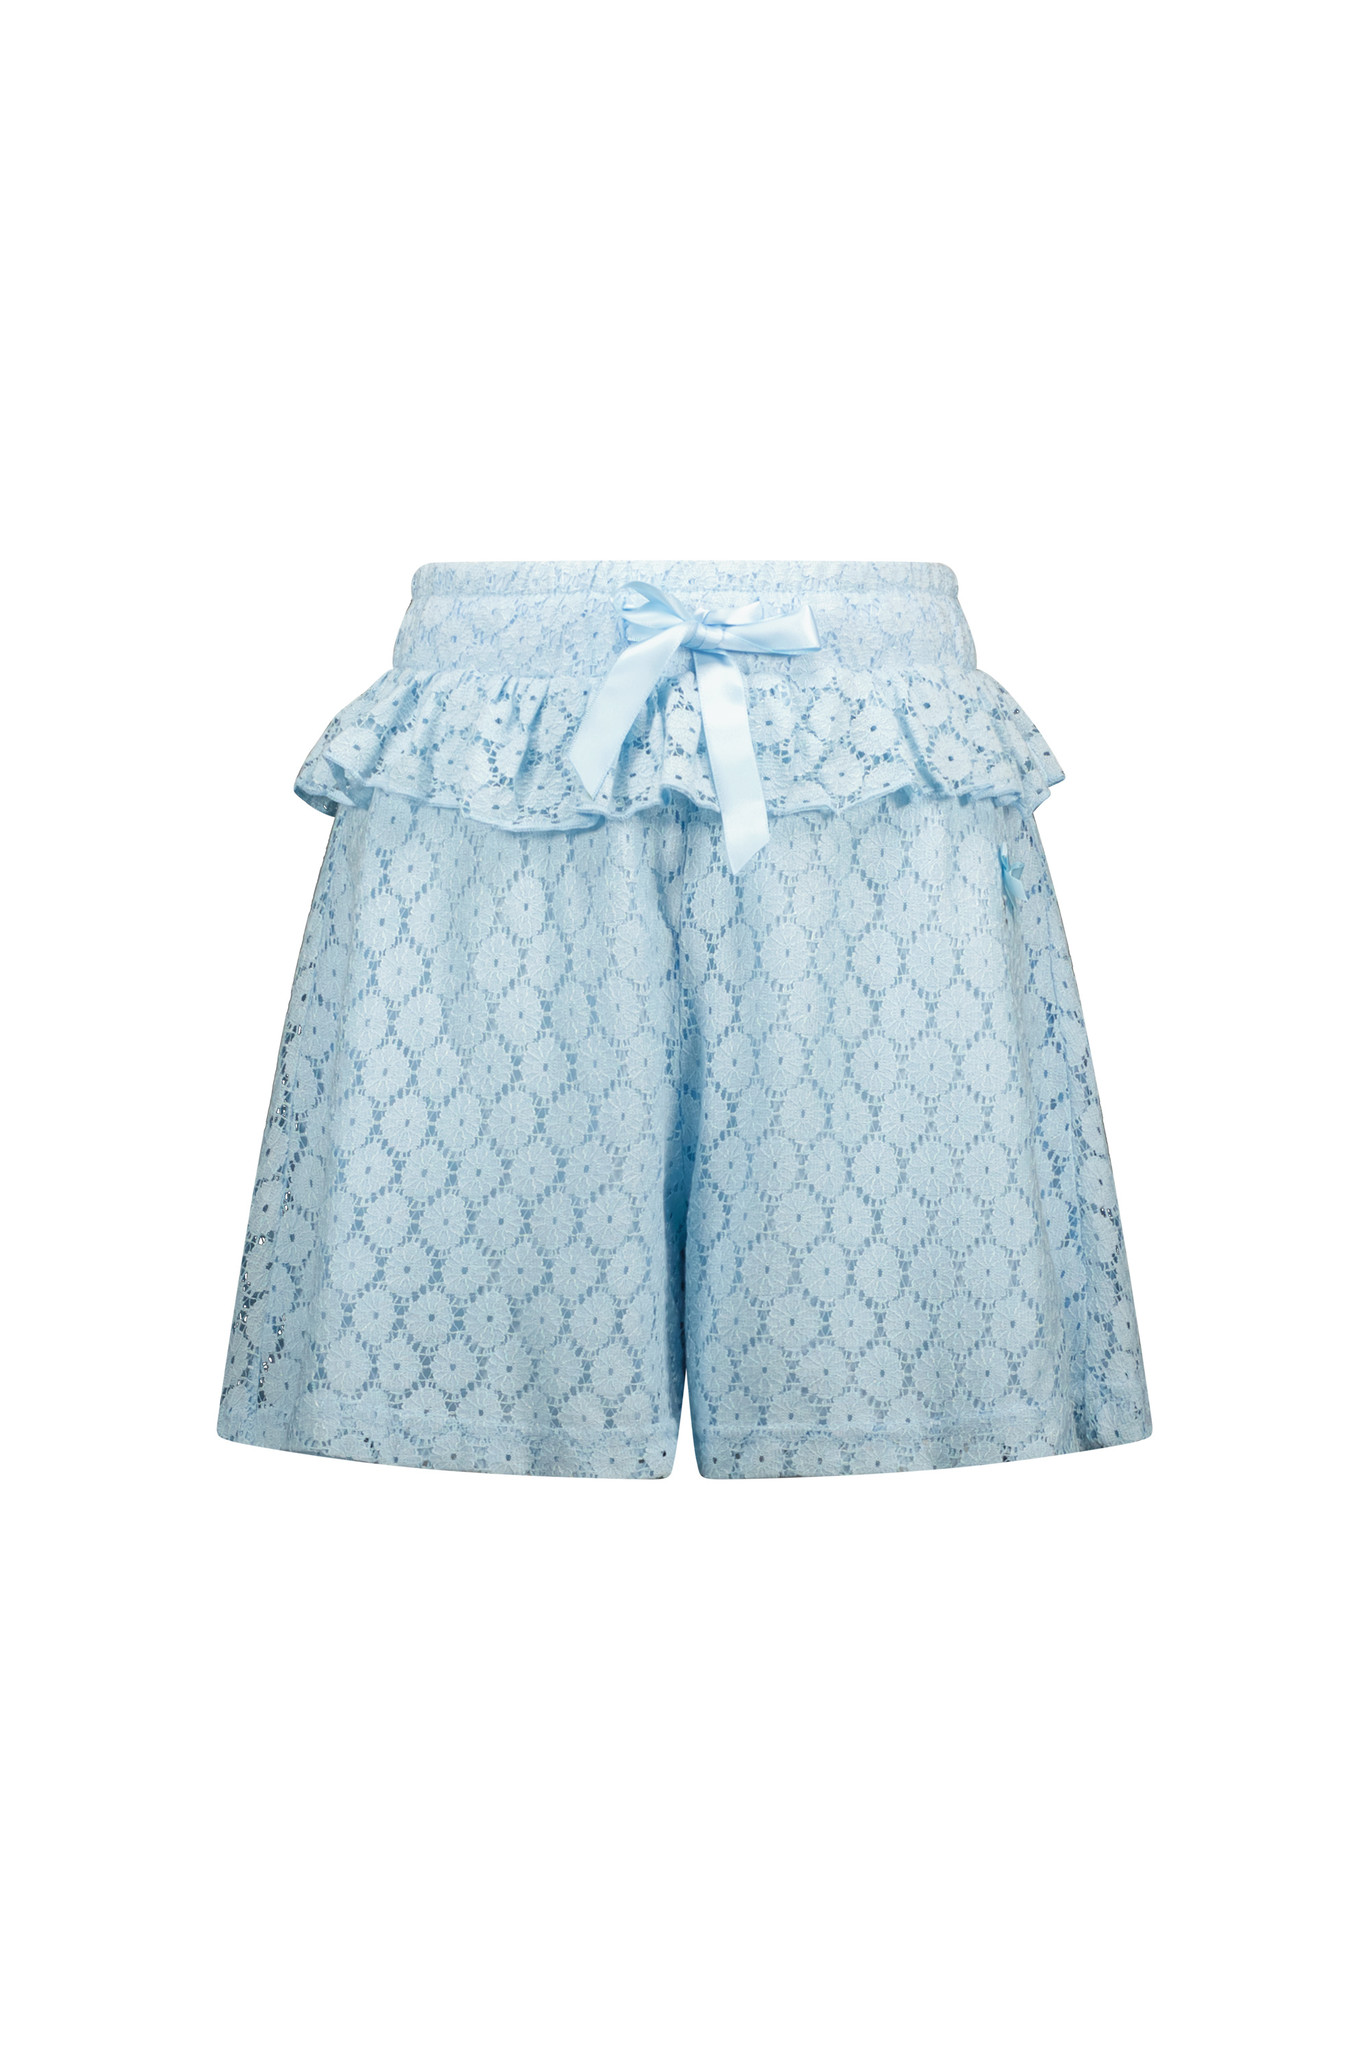 Le Chic Meisjes short met kant - Dianaly - Song sung blauw